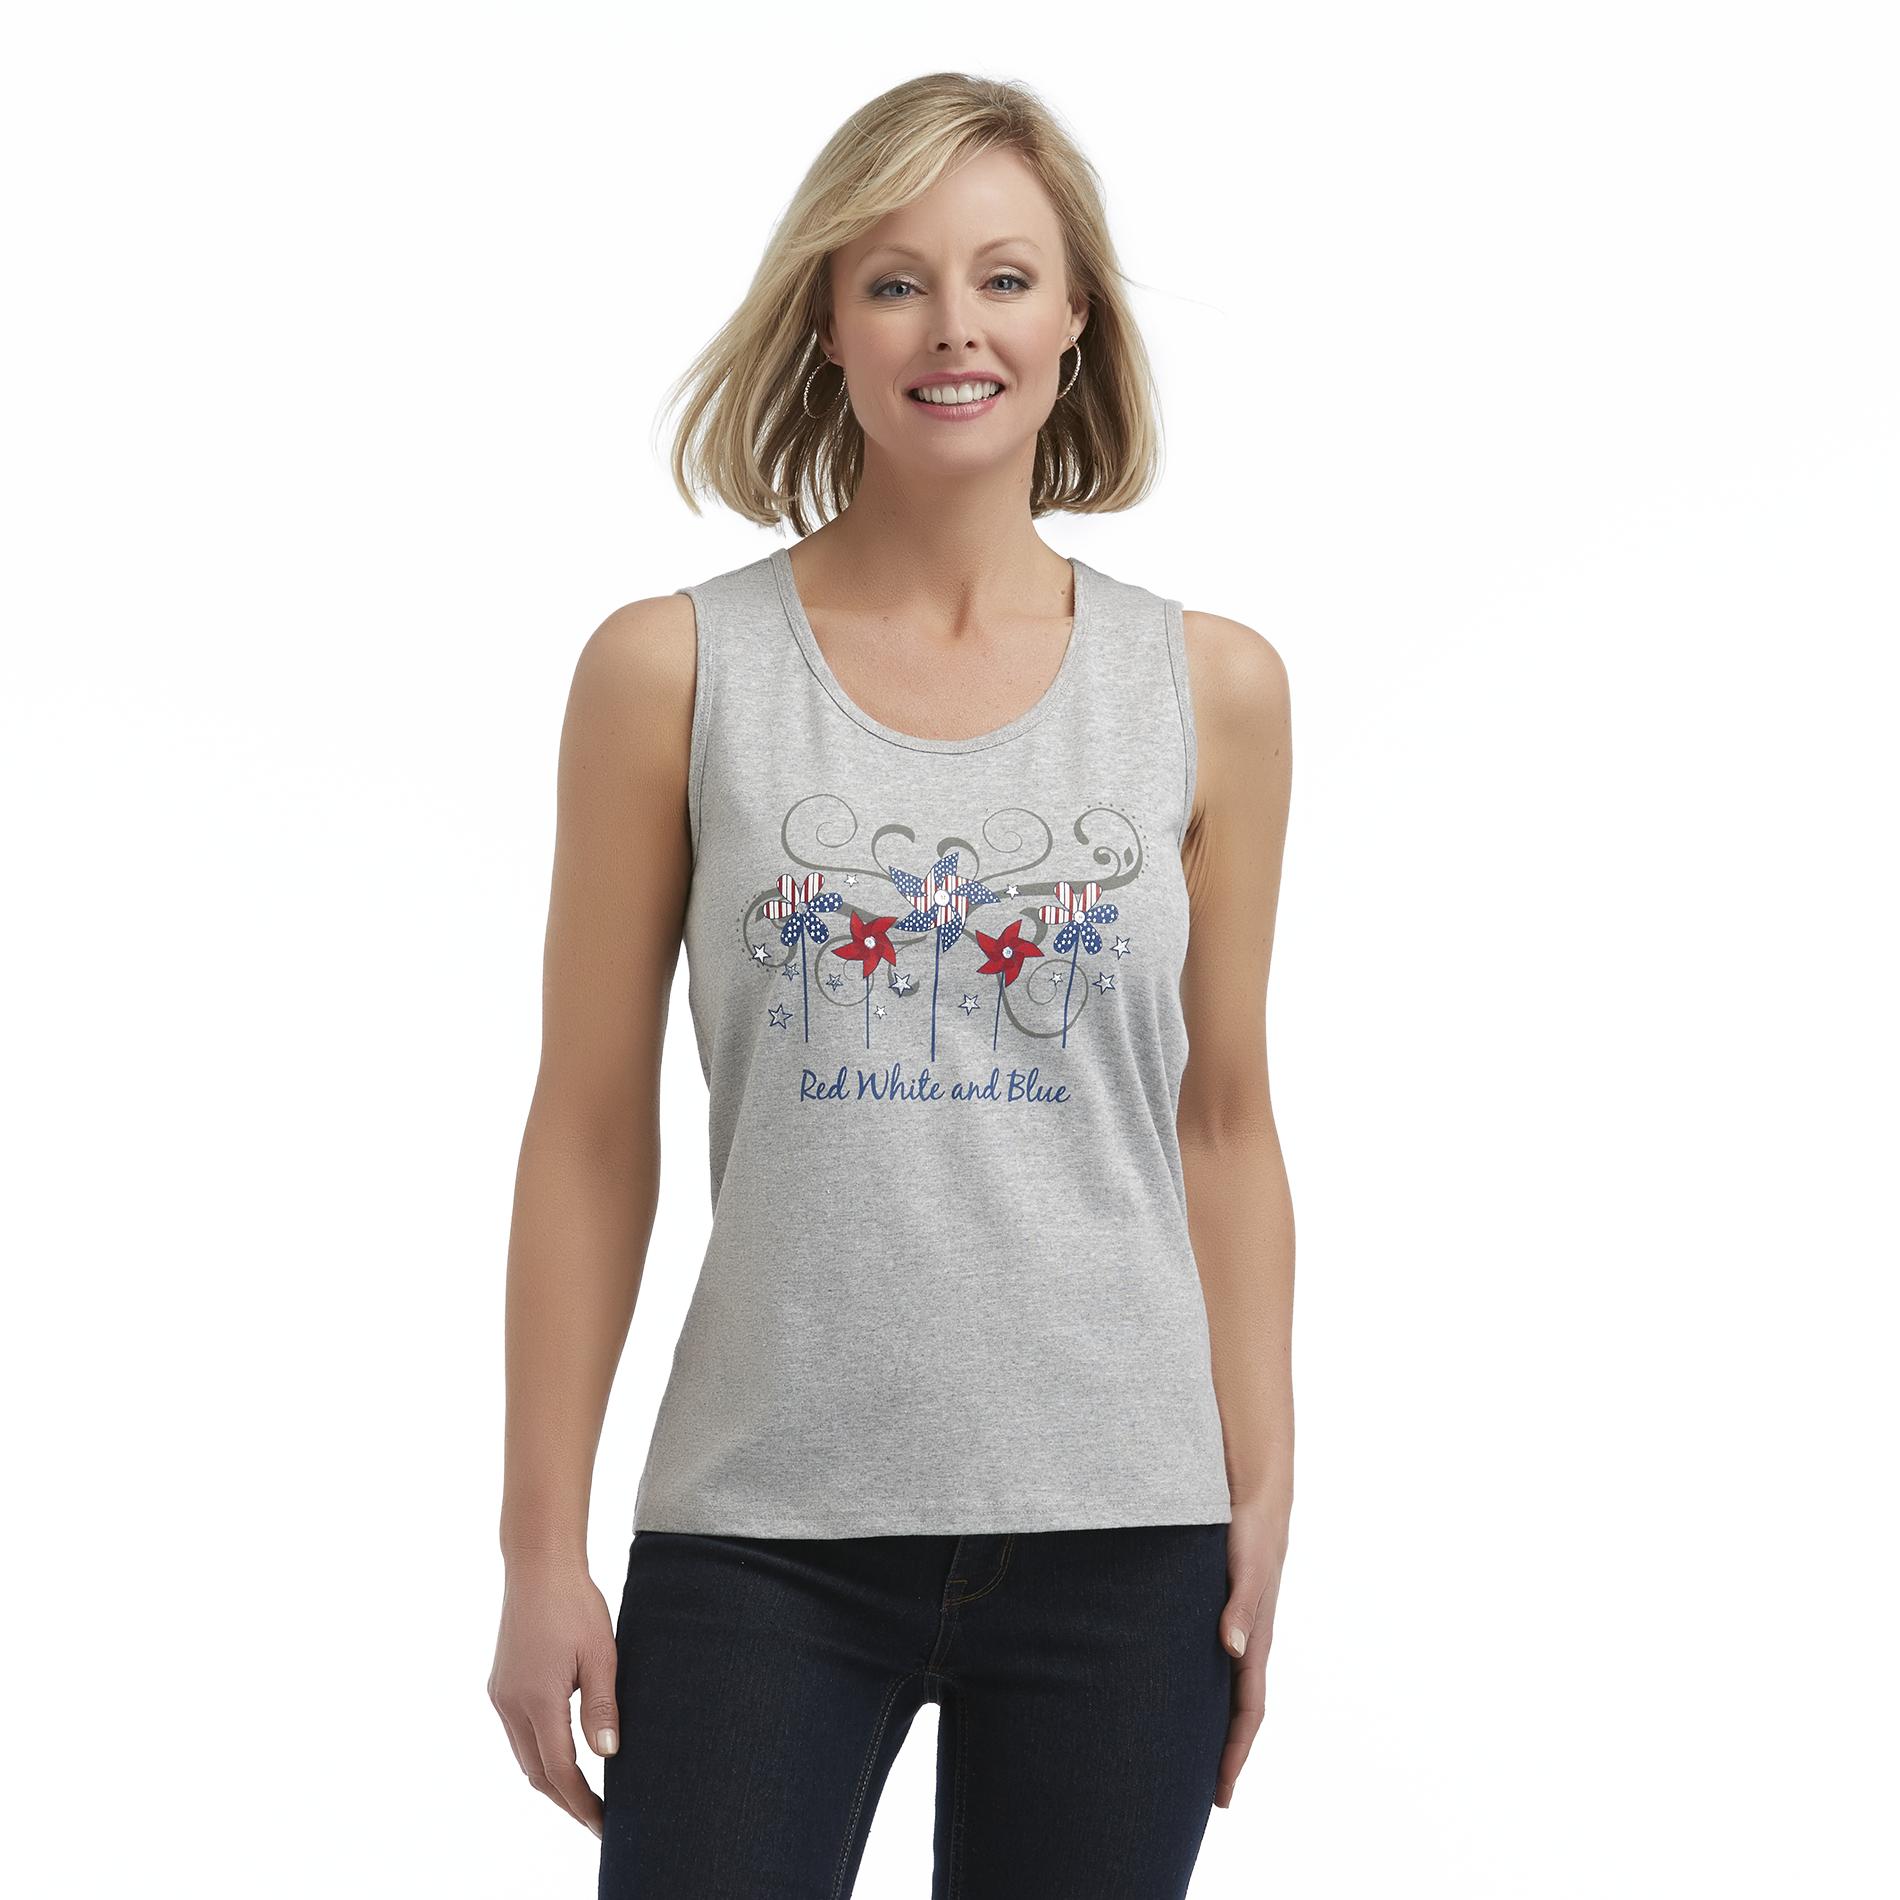 Holiday Editions Women's Graphic Tank Top - Americana